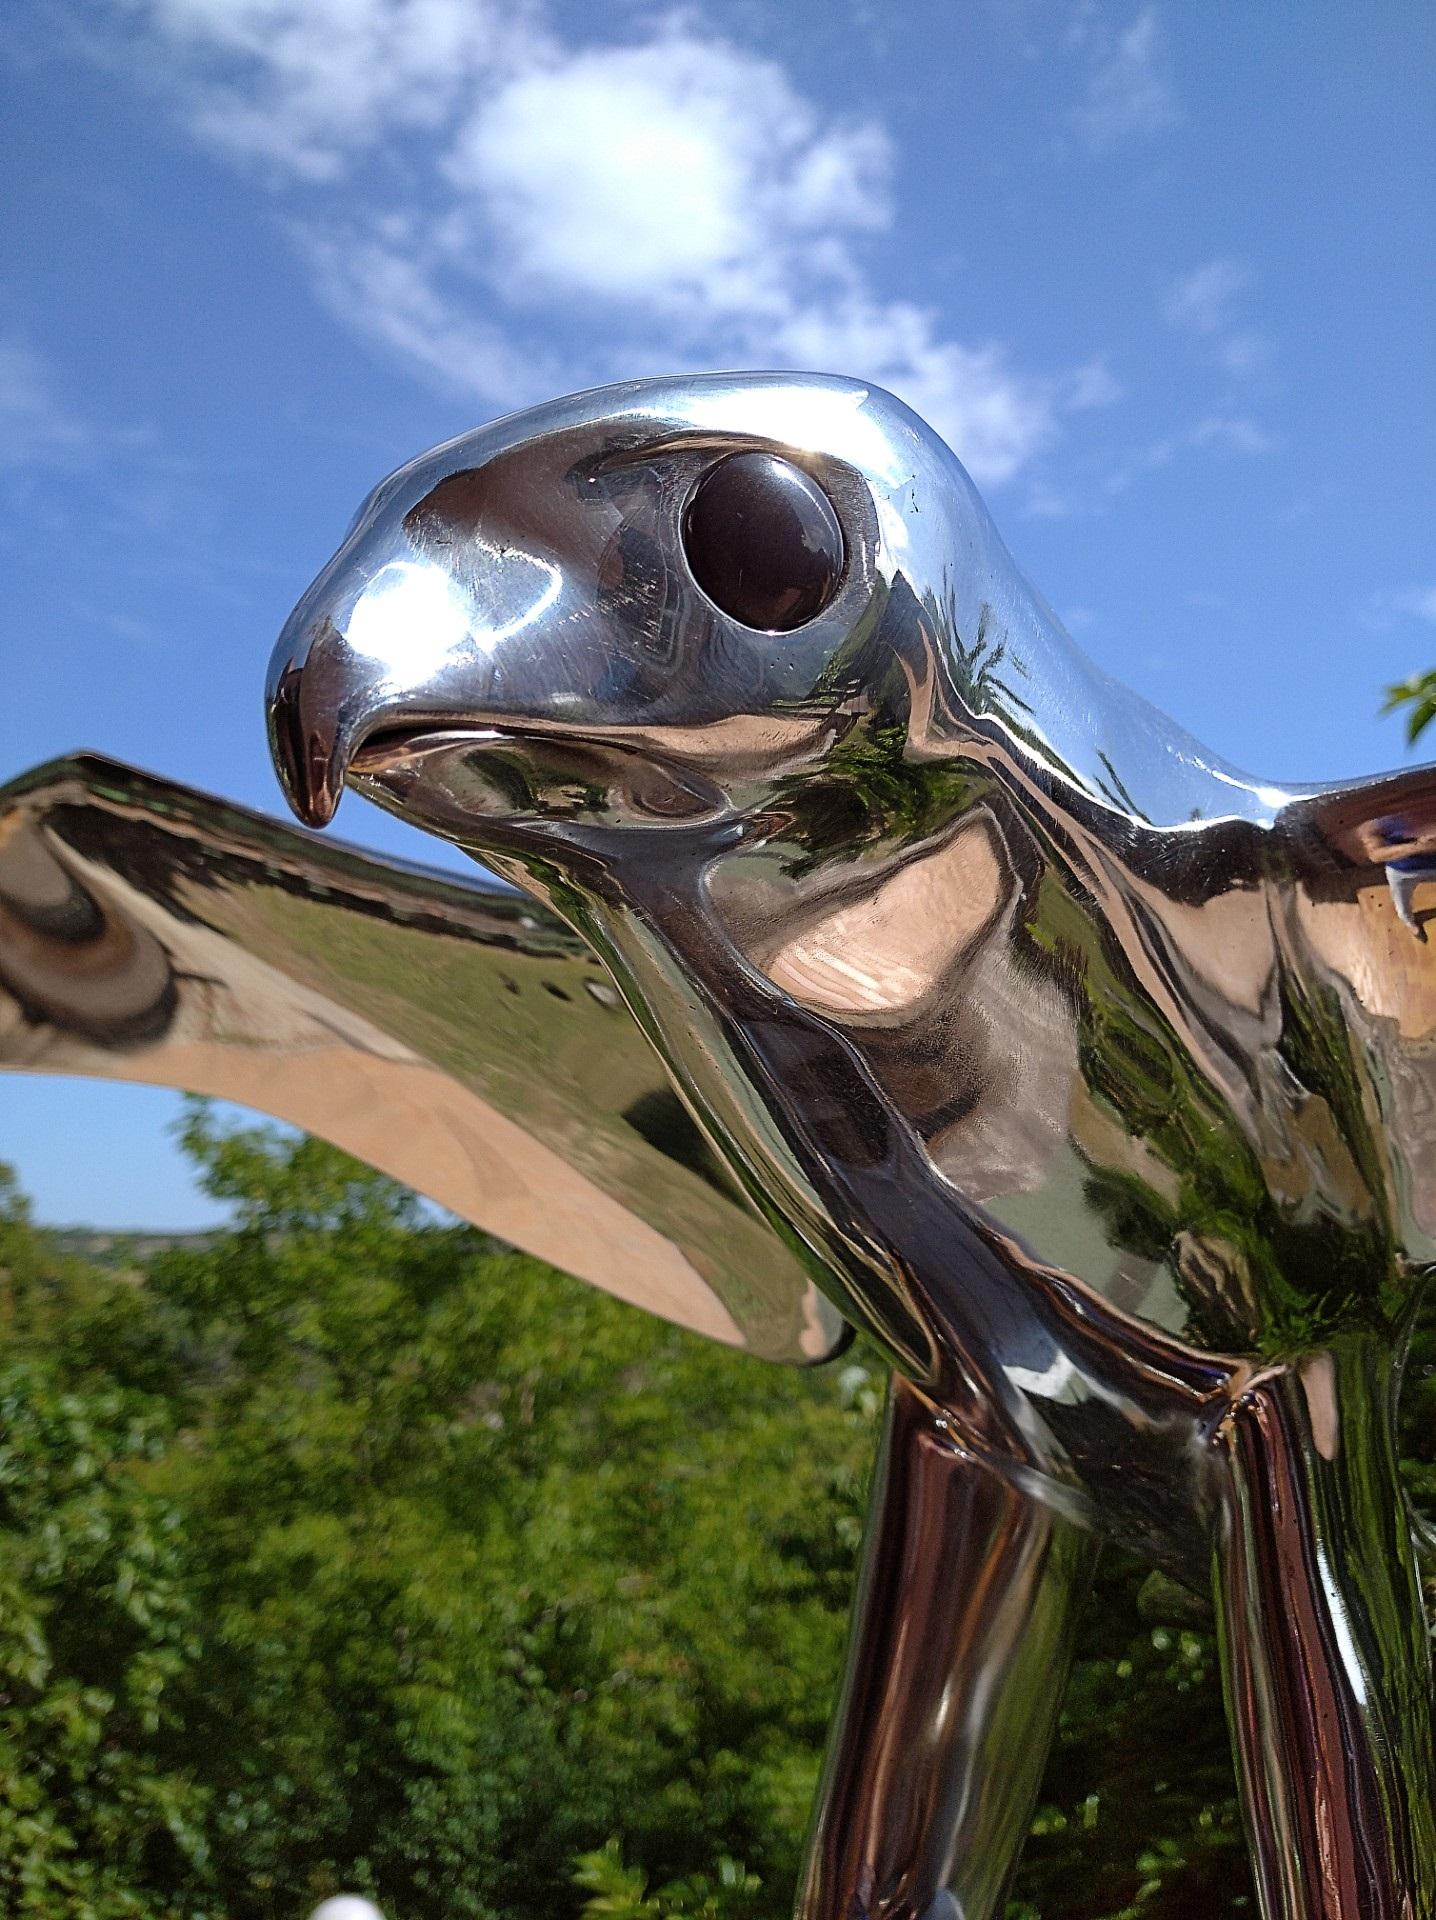 This unique piece, named “Falcon”, was created and shaped by Lutfi Romhein directly from 2 mm thick 316L stainless steel sheets.

This artwork depicts a very realistic falcon in its standing position. The whole work of the artist on the organic